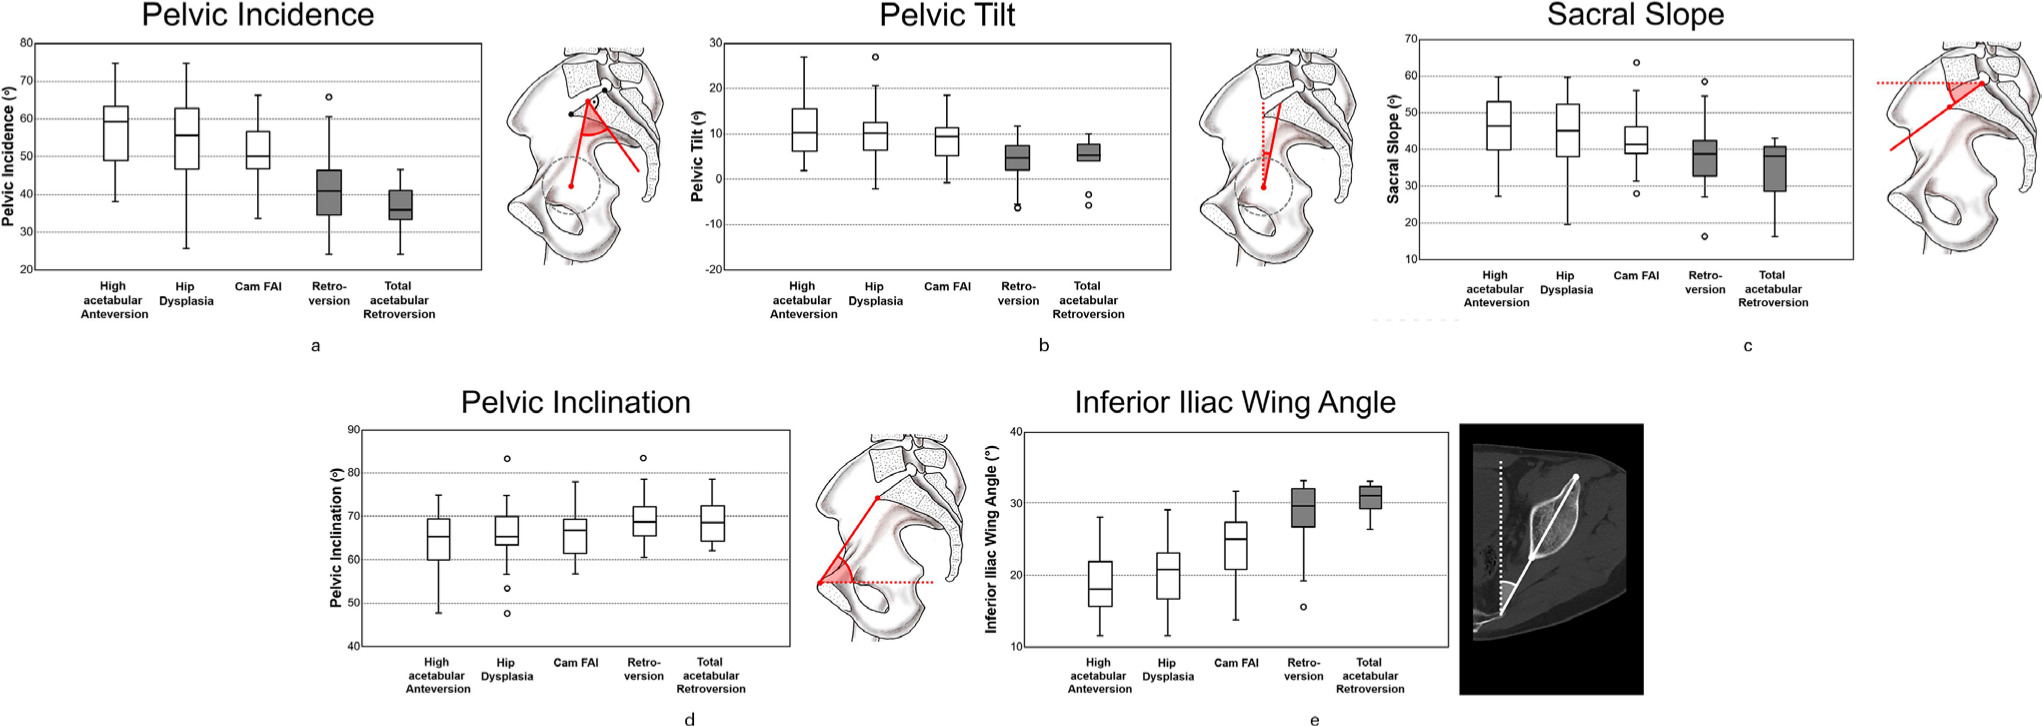 Fig. 4 
          Boxplots for a) pelvic incidence, b) pelvic tilt (PT), c) sacral slope (SS), d) pelvic inclination, and e) the inferior iliac wing angle. We found a significantly decreased PI, PT and SS for acetabular retroversion (AR) compared to hip dysplasia. In addition, we found a significantly increased inferior iliac wing angle for AR compared to hip dysplasia. The level of significance was adjusted for 6 groups (0.05/6 = 0.008). Dark boxes signify significant difference compared to hip dysplasia. FAI, femoroacetabular impingement.
        